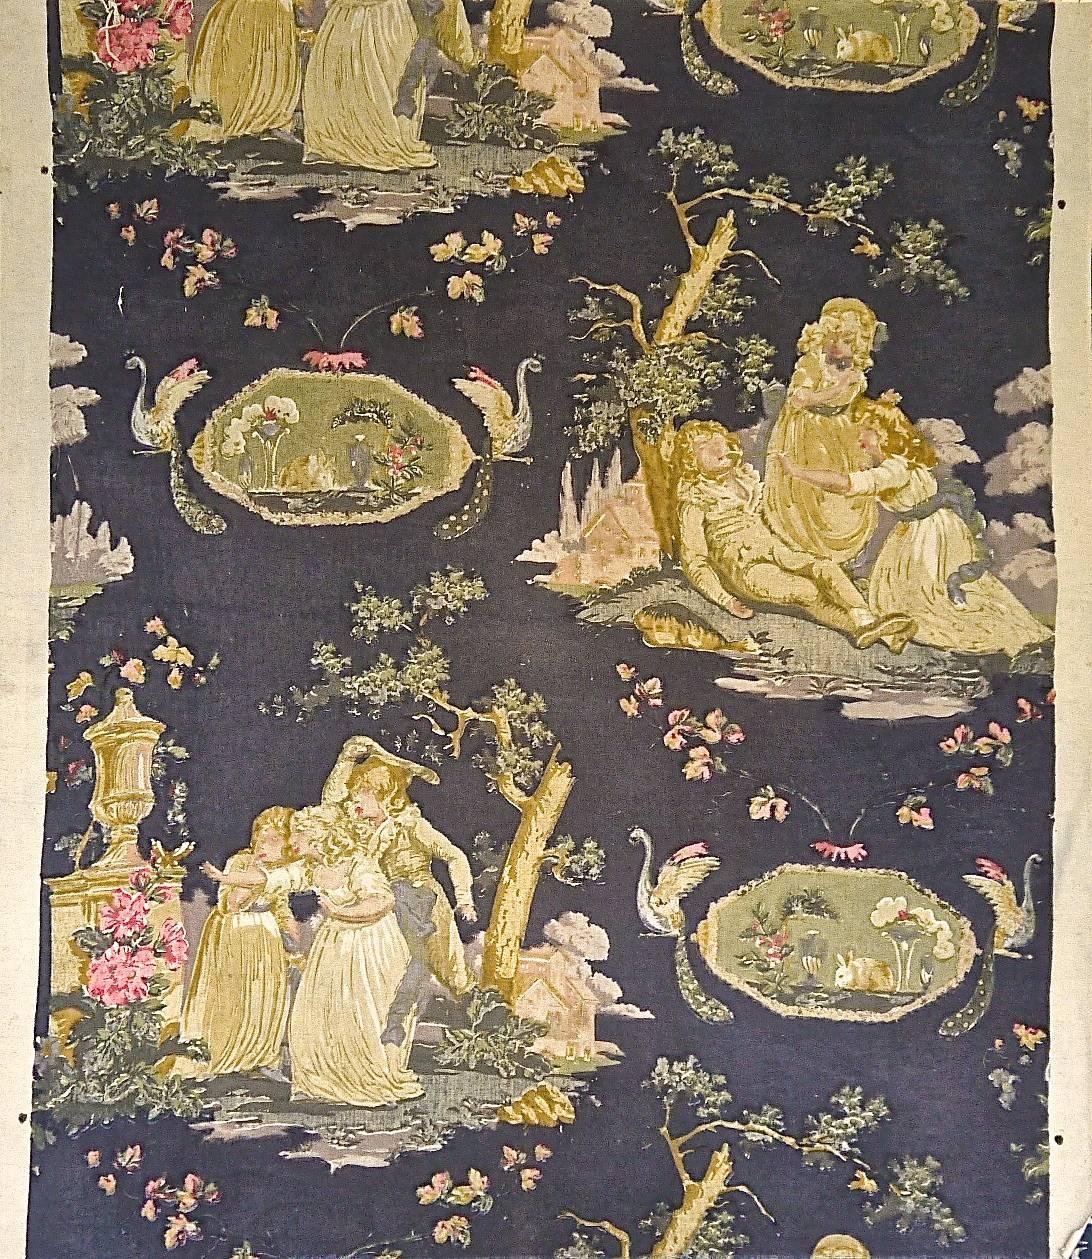 Early 20th century French toile with scenes of children in 18th century costume on a dark blue ground.With birds and medallions of rabbits.The design has a painterly feel.